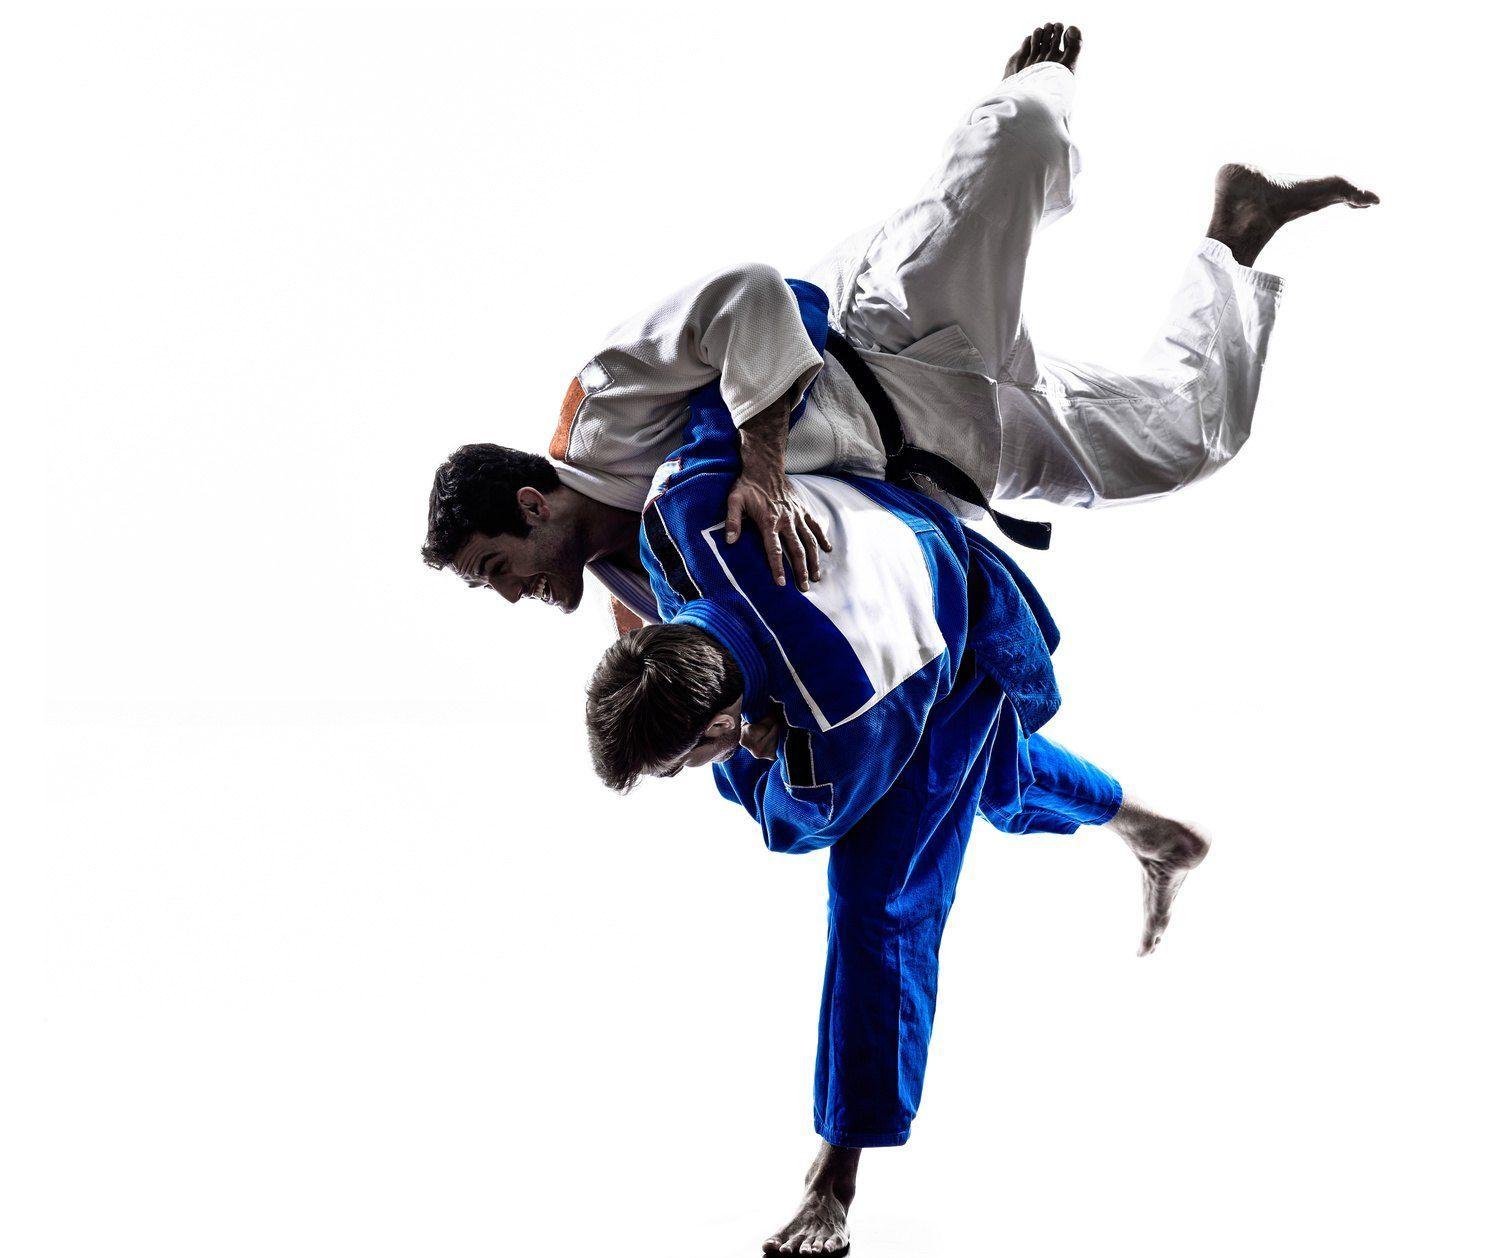 When taking Judo, you will learn a variety of skills involving